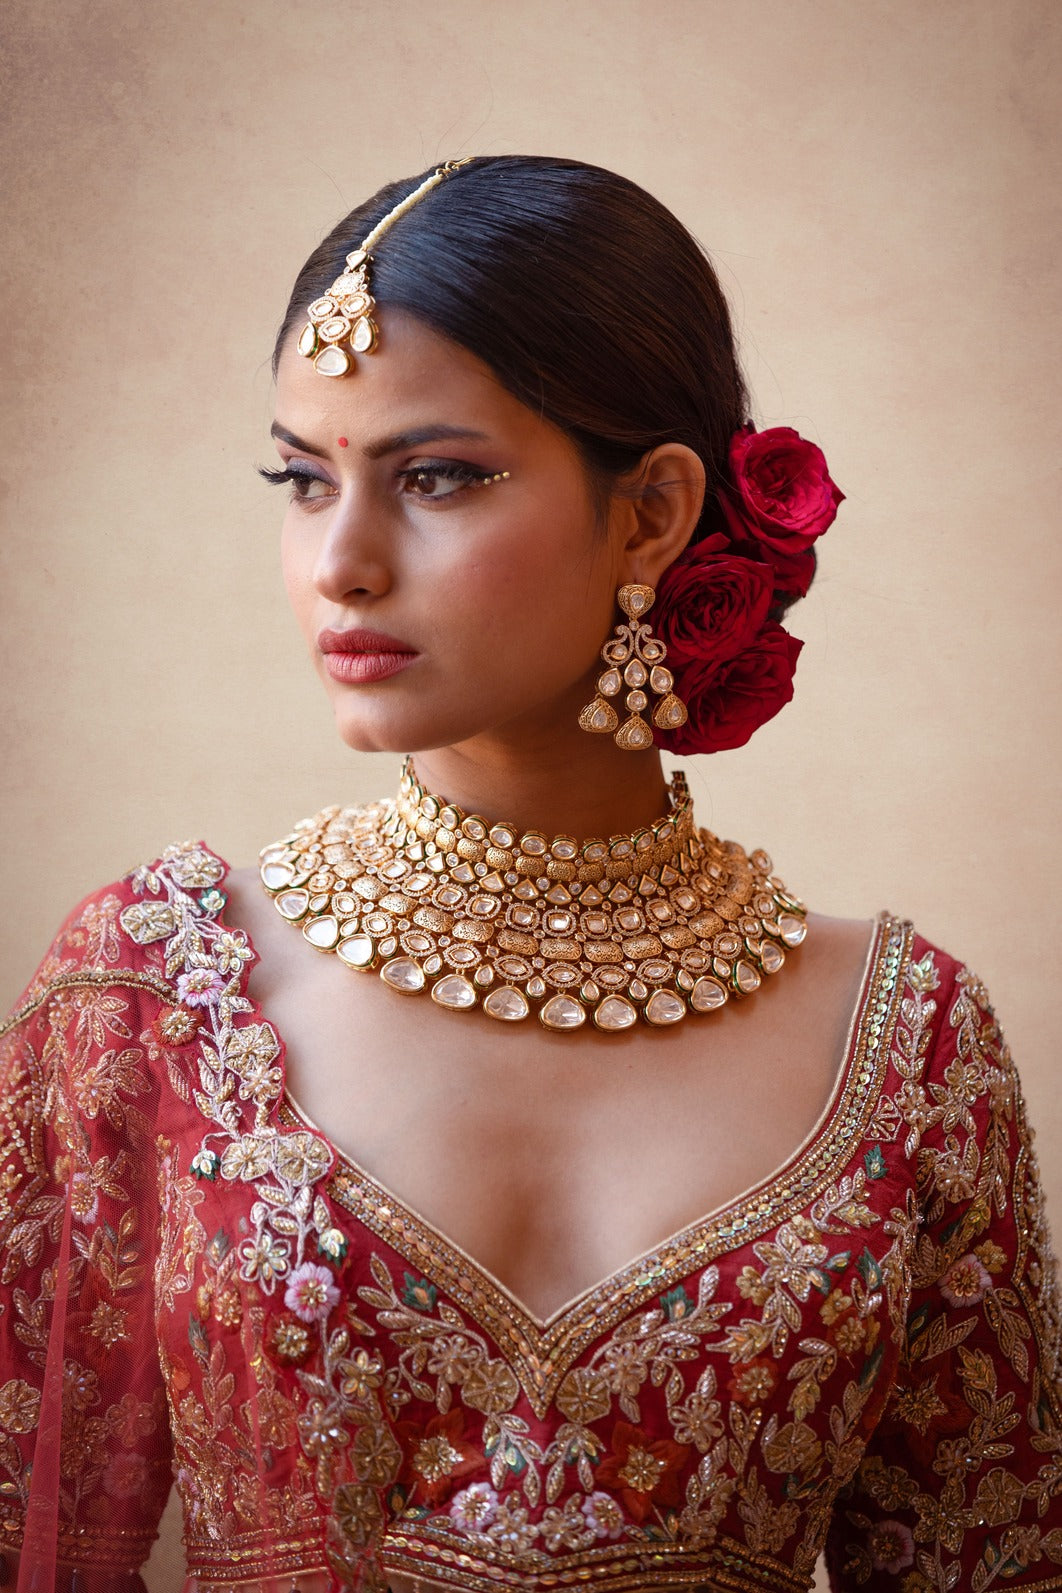 Asian Bridal Makeup Trends 2019 - Asian Bride Wearing Traditional Bold Red  Lipstick